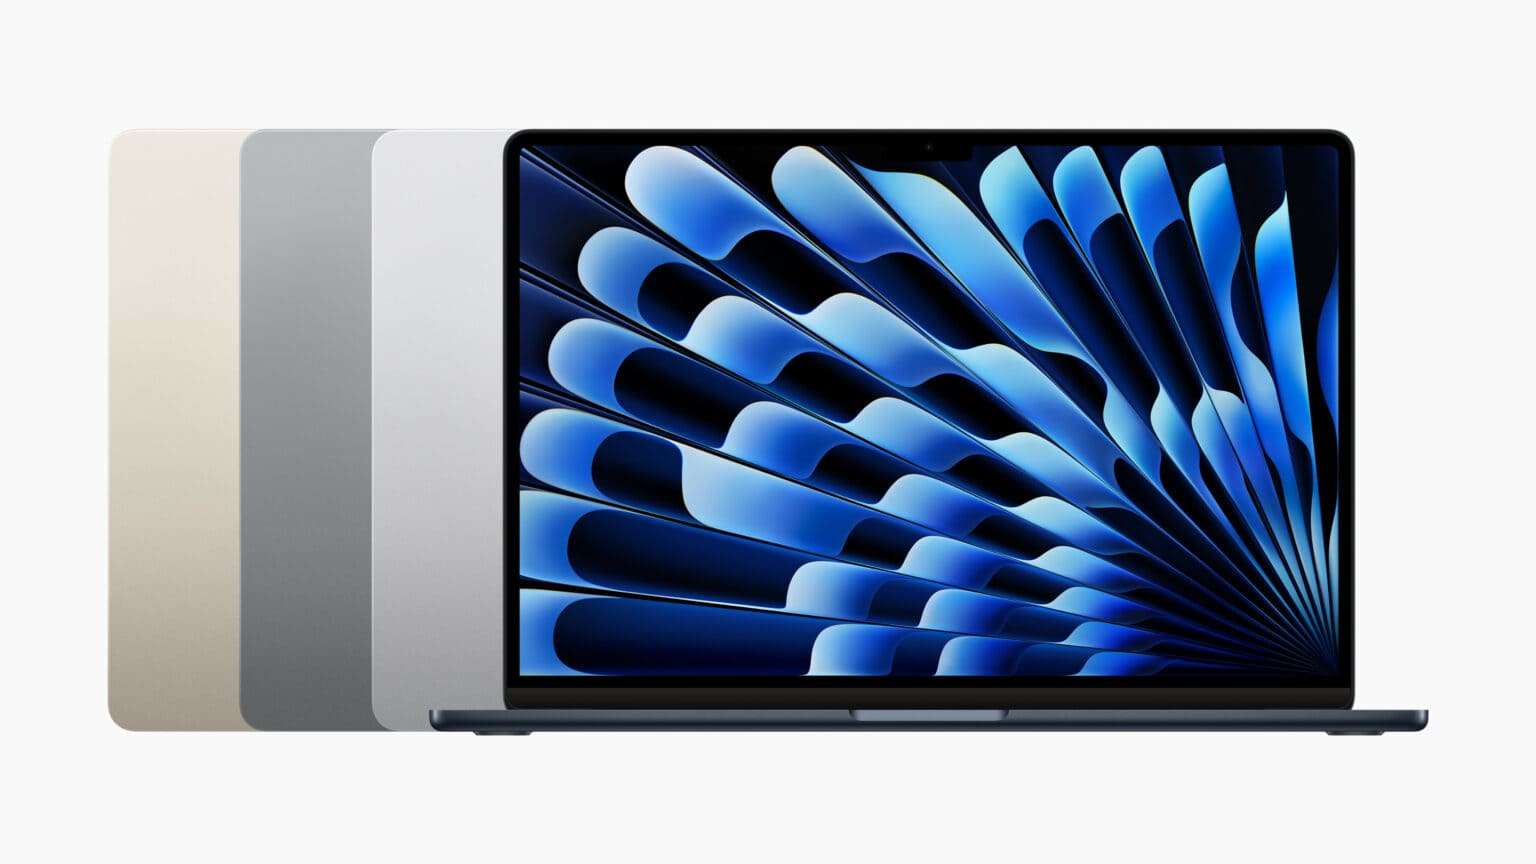 The 15-inch MacBook Air comes in four colors: midnight, starlight, space gray and silver.